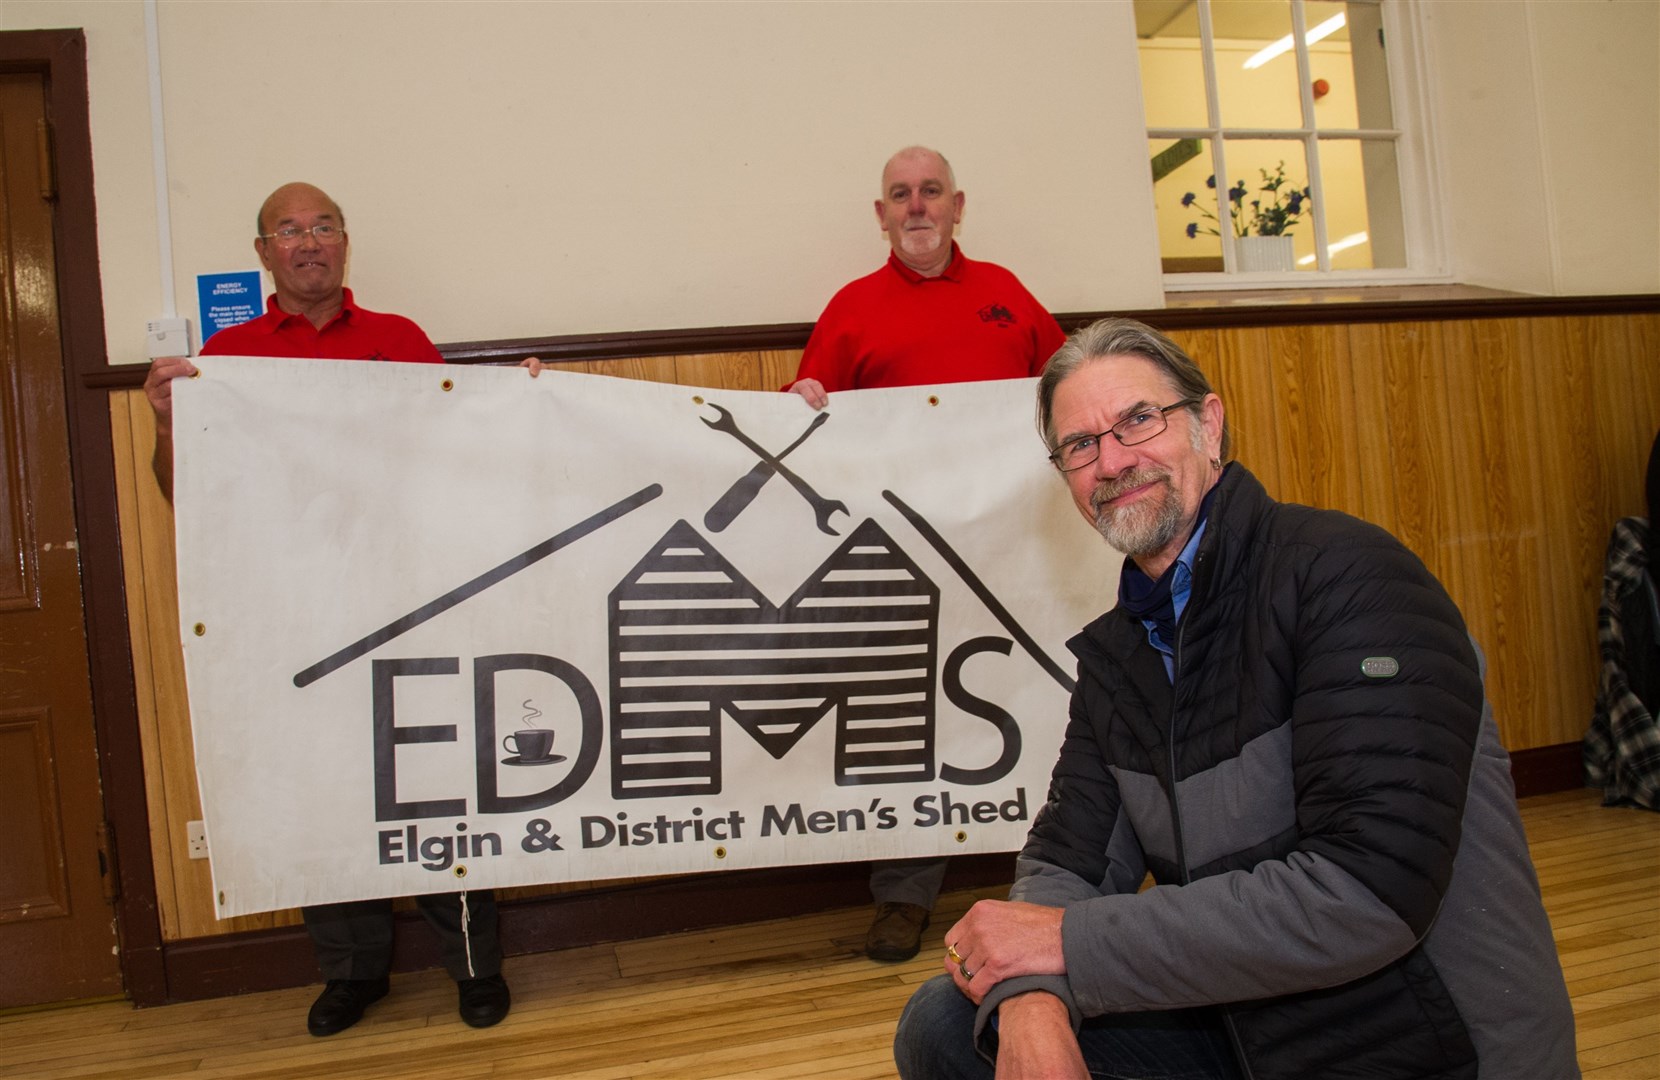 Peter Harris (left) and Alan Baillie (back), of Elgin and District Men's Shed, with Jason Schroeder, Scottish Men's Shed Association founder, at the Elgin meeting. Picture: Becky Saunderson.